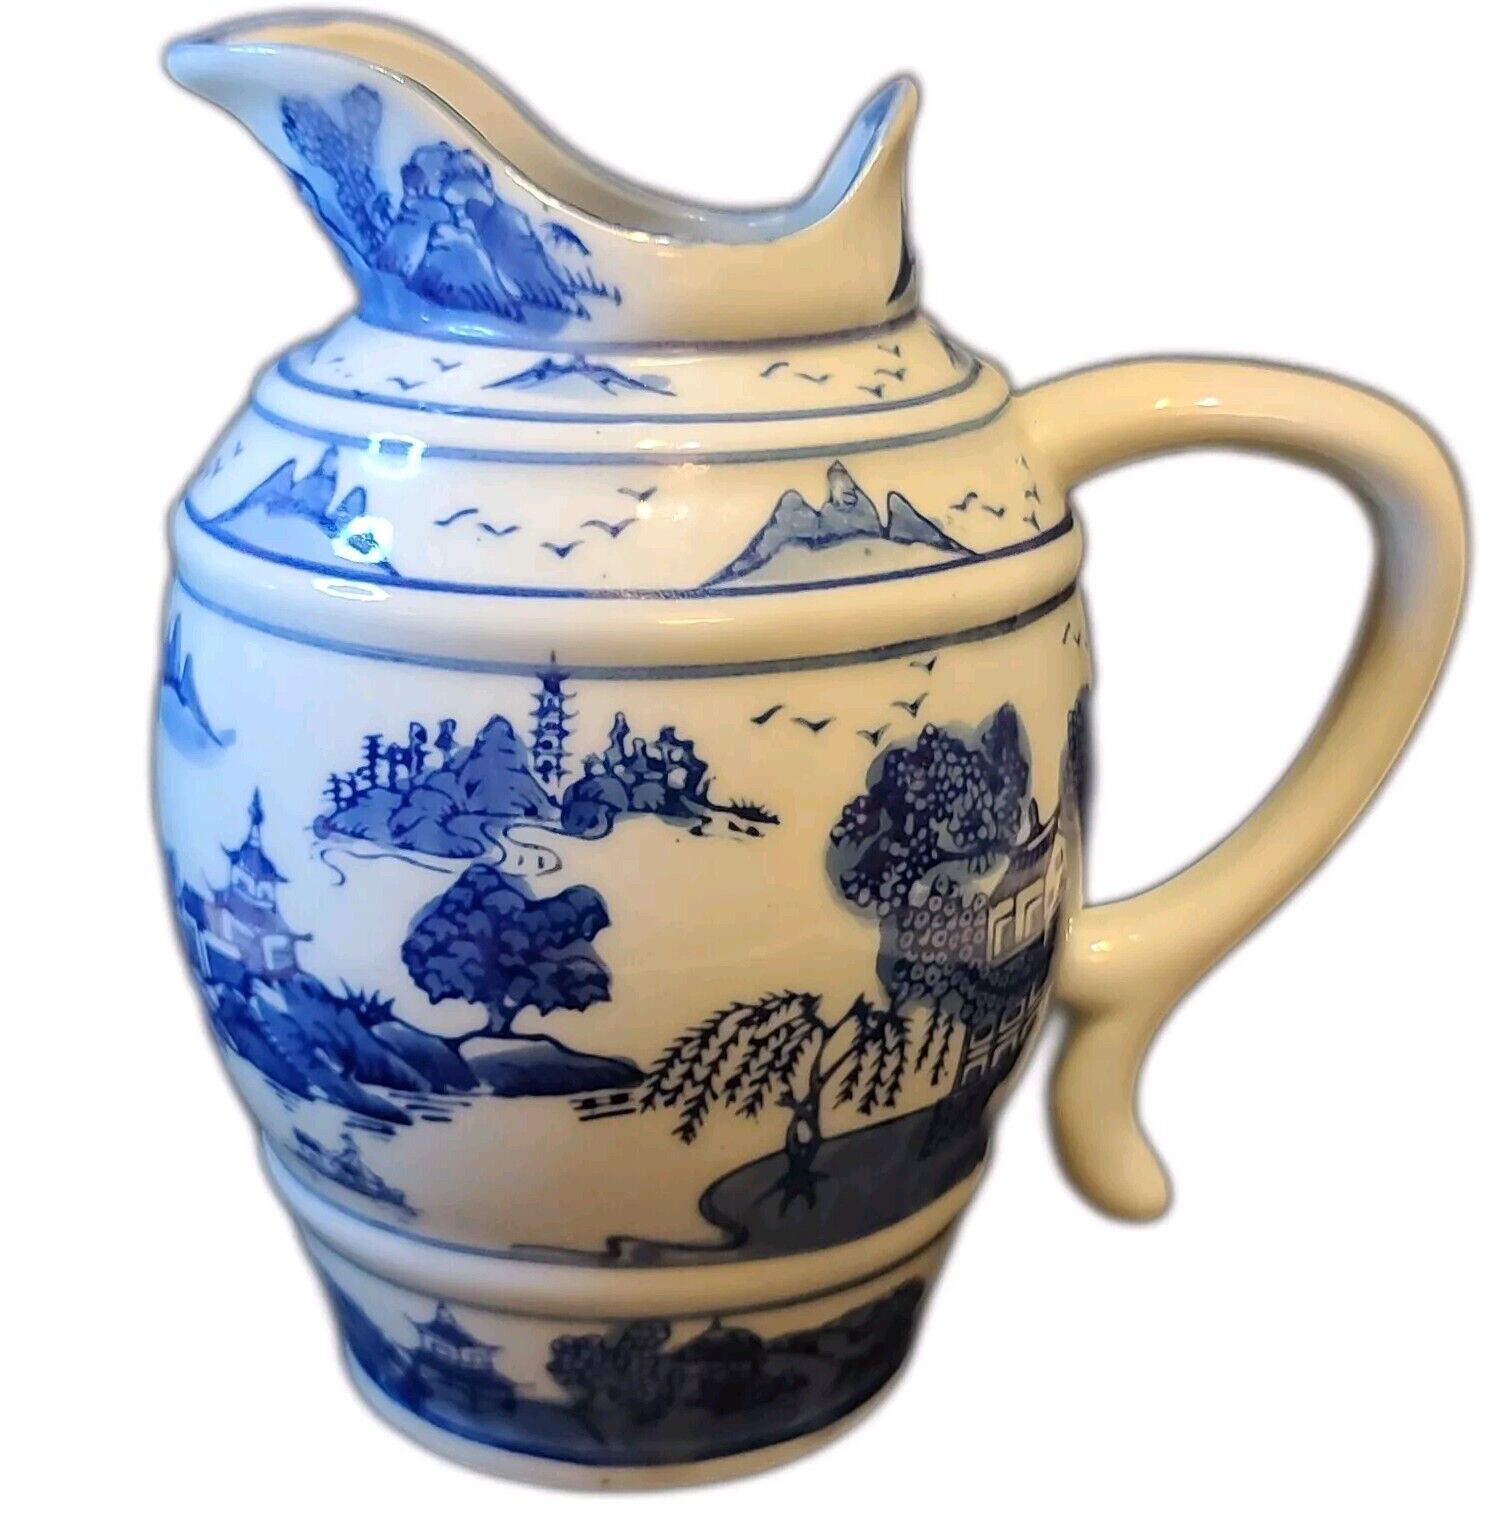 Vintage 1992 Blue and White Vienna Woods Porcelain Pitcher Asian Homes Design